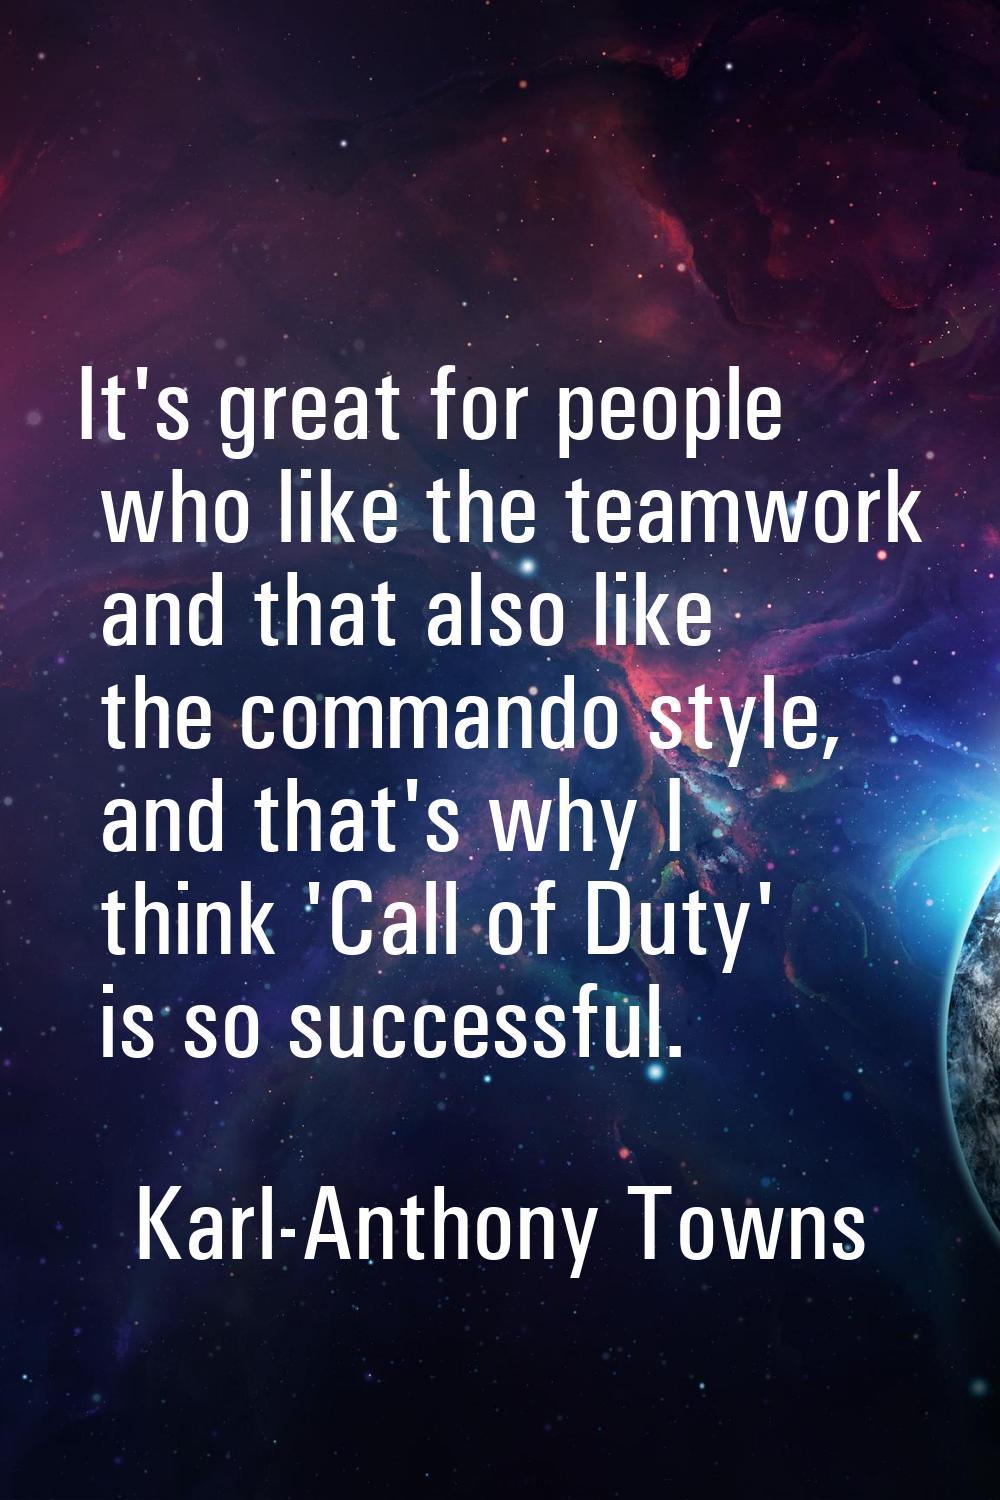 It's great for people who like the teamwork and that also like the commando style, and that's why I